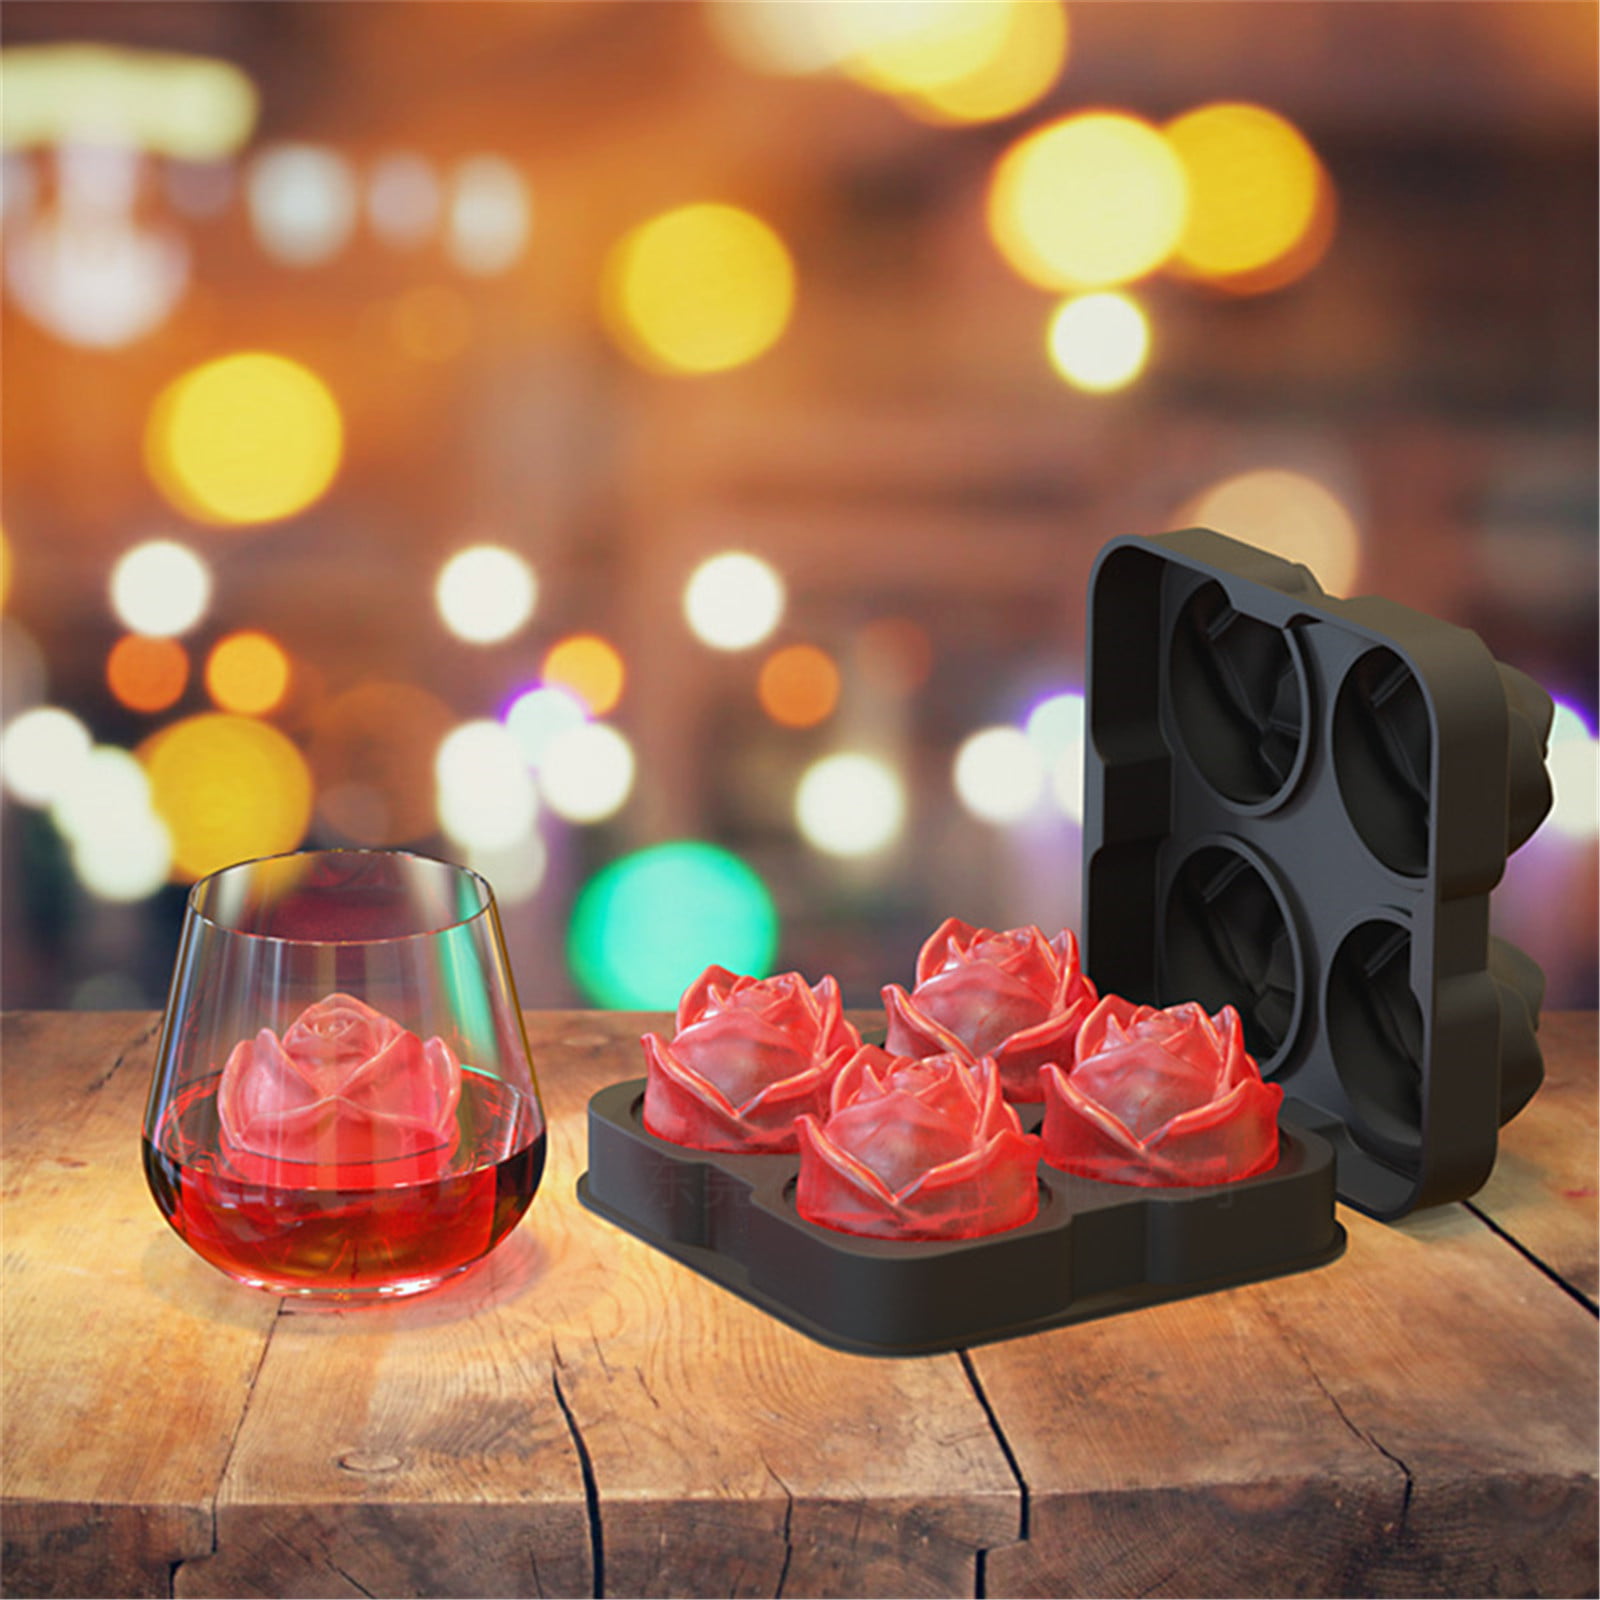 KooMall 3D Rose Ice Molds 2.5 inch, Large Ice Cube Trays, Make 4 Giant Cute Flower Shape Ice, Silicone Rubber Fun Big Ice Ball Maker for Cocktails